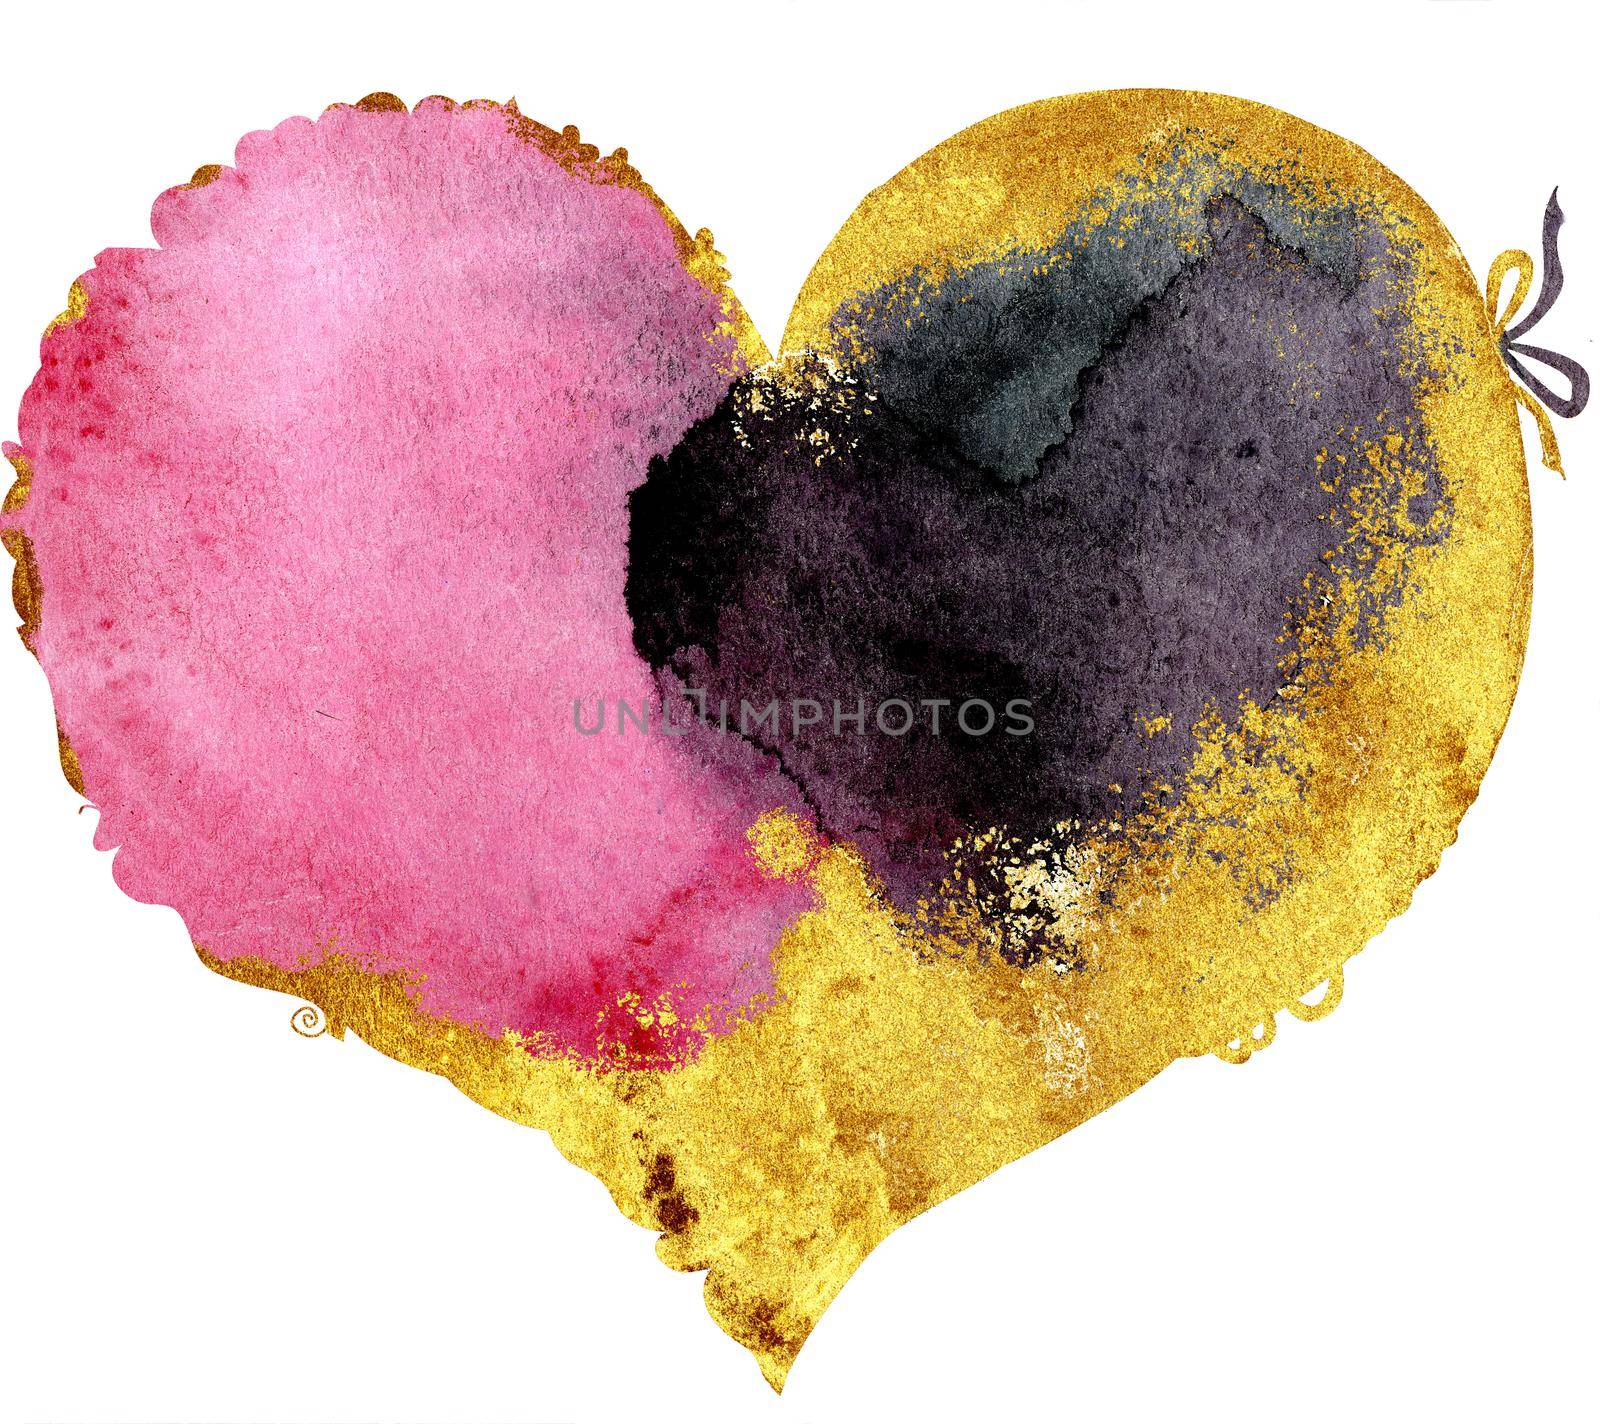 Watercolor pink and black heart with a lace edge with gold strokes by NataOmsk